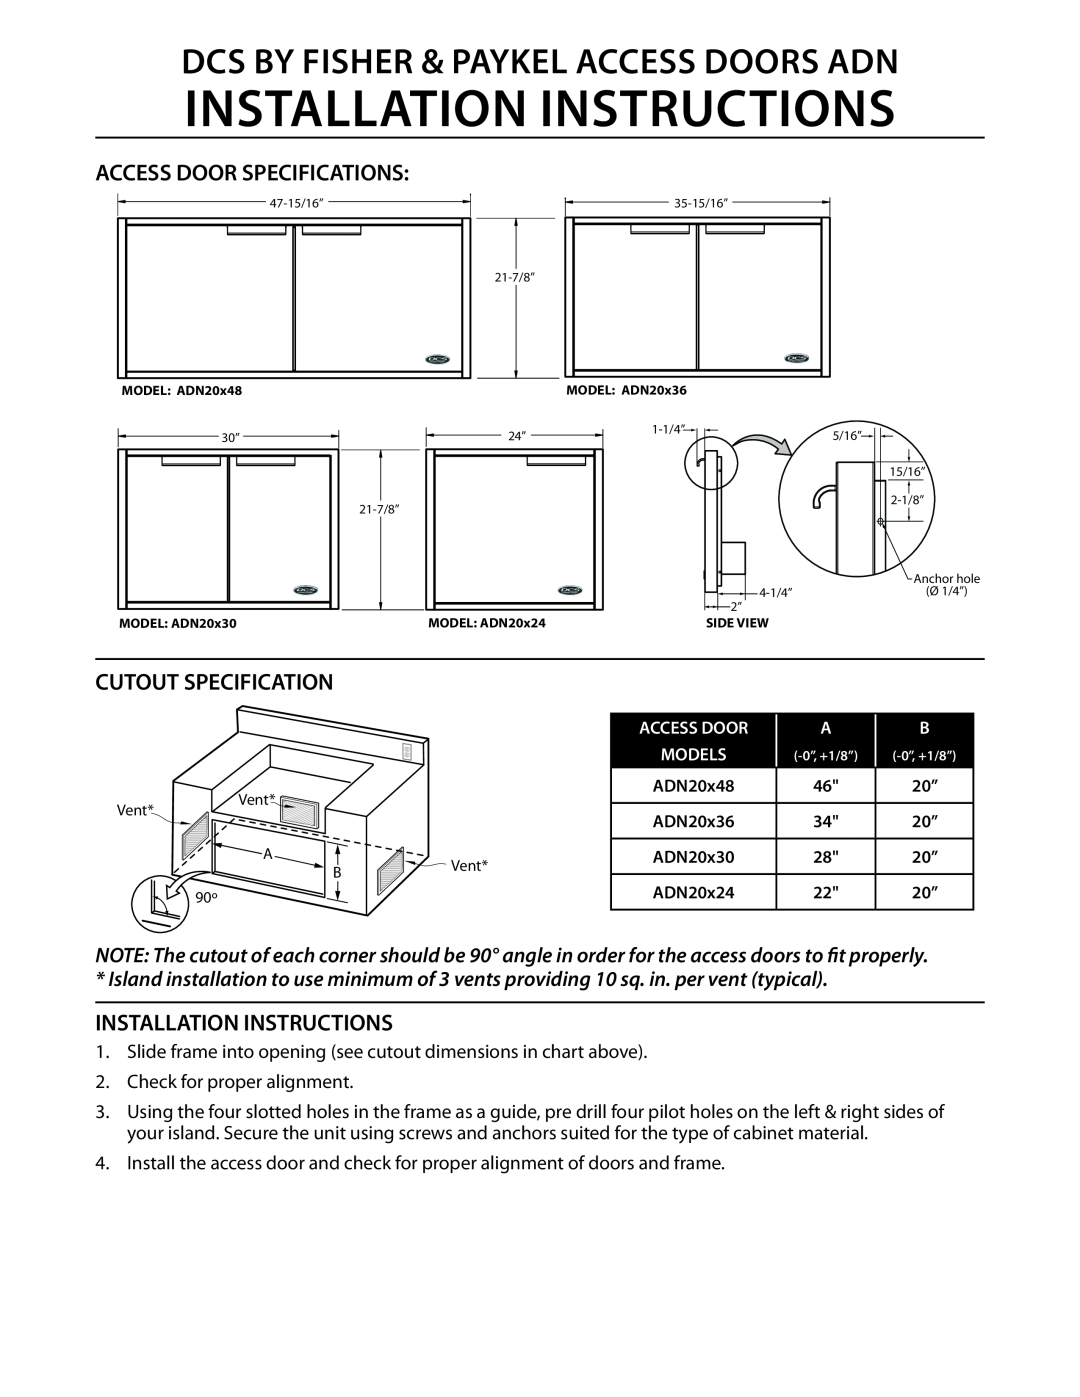 Fisher & Paykel ADN20x36 installation instructions Dcs By Fisher & Paykel Access Doors Adn, Access Door Specifications 